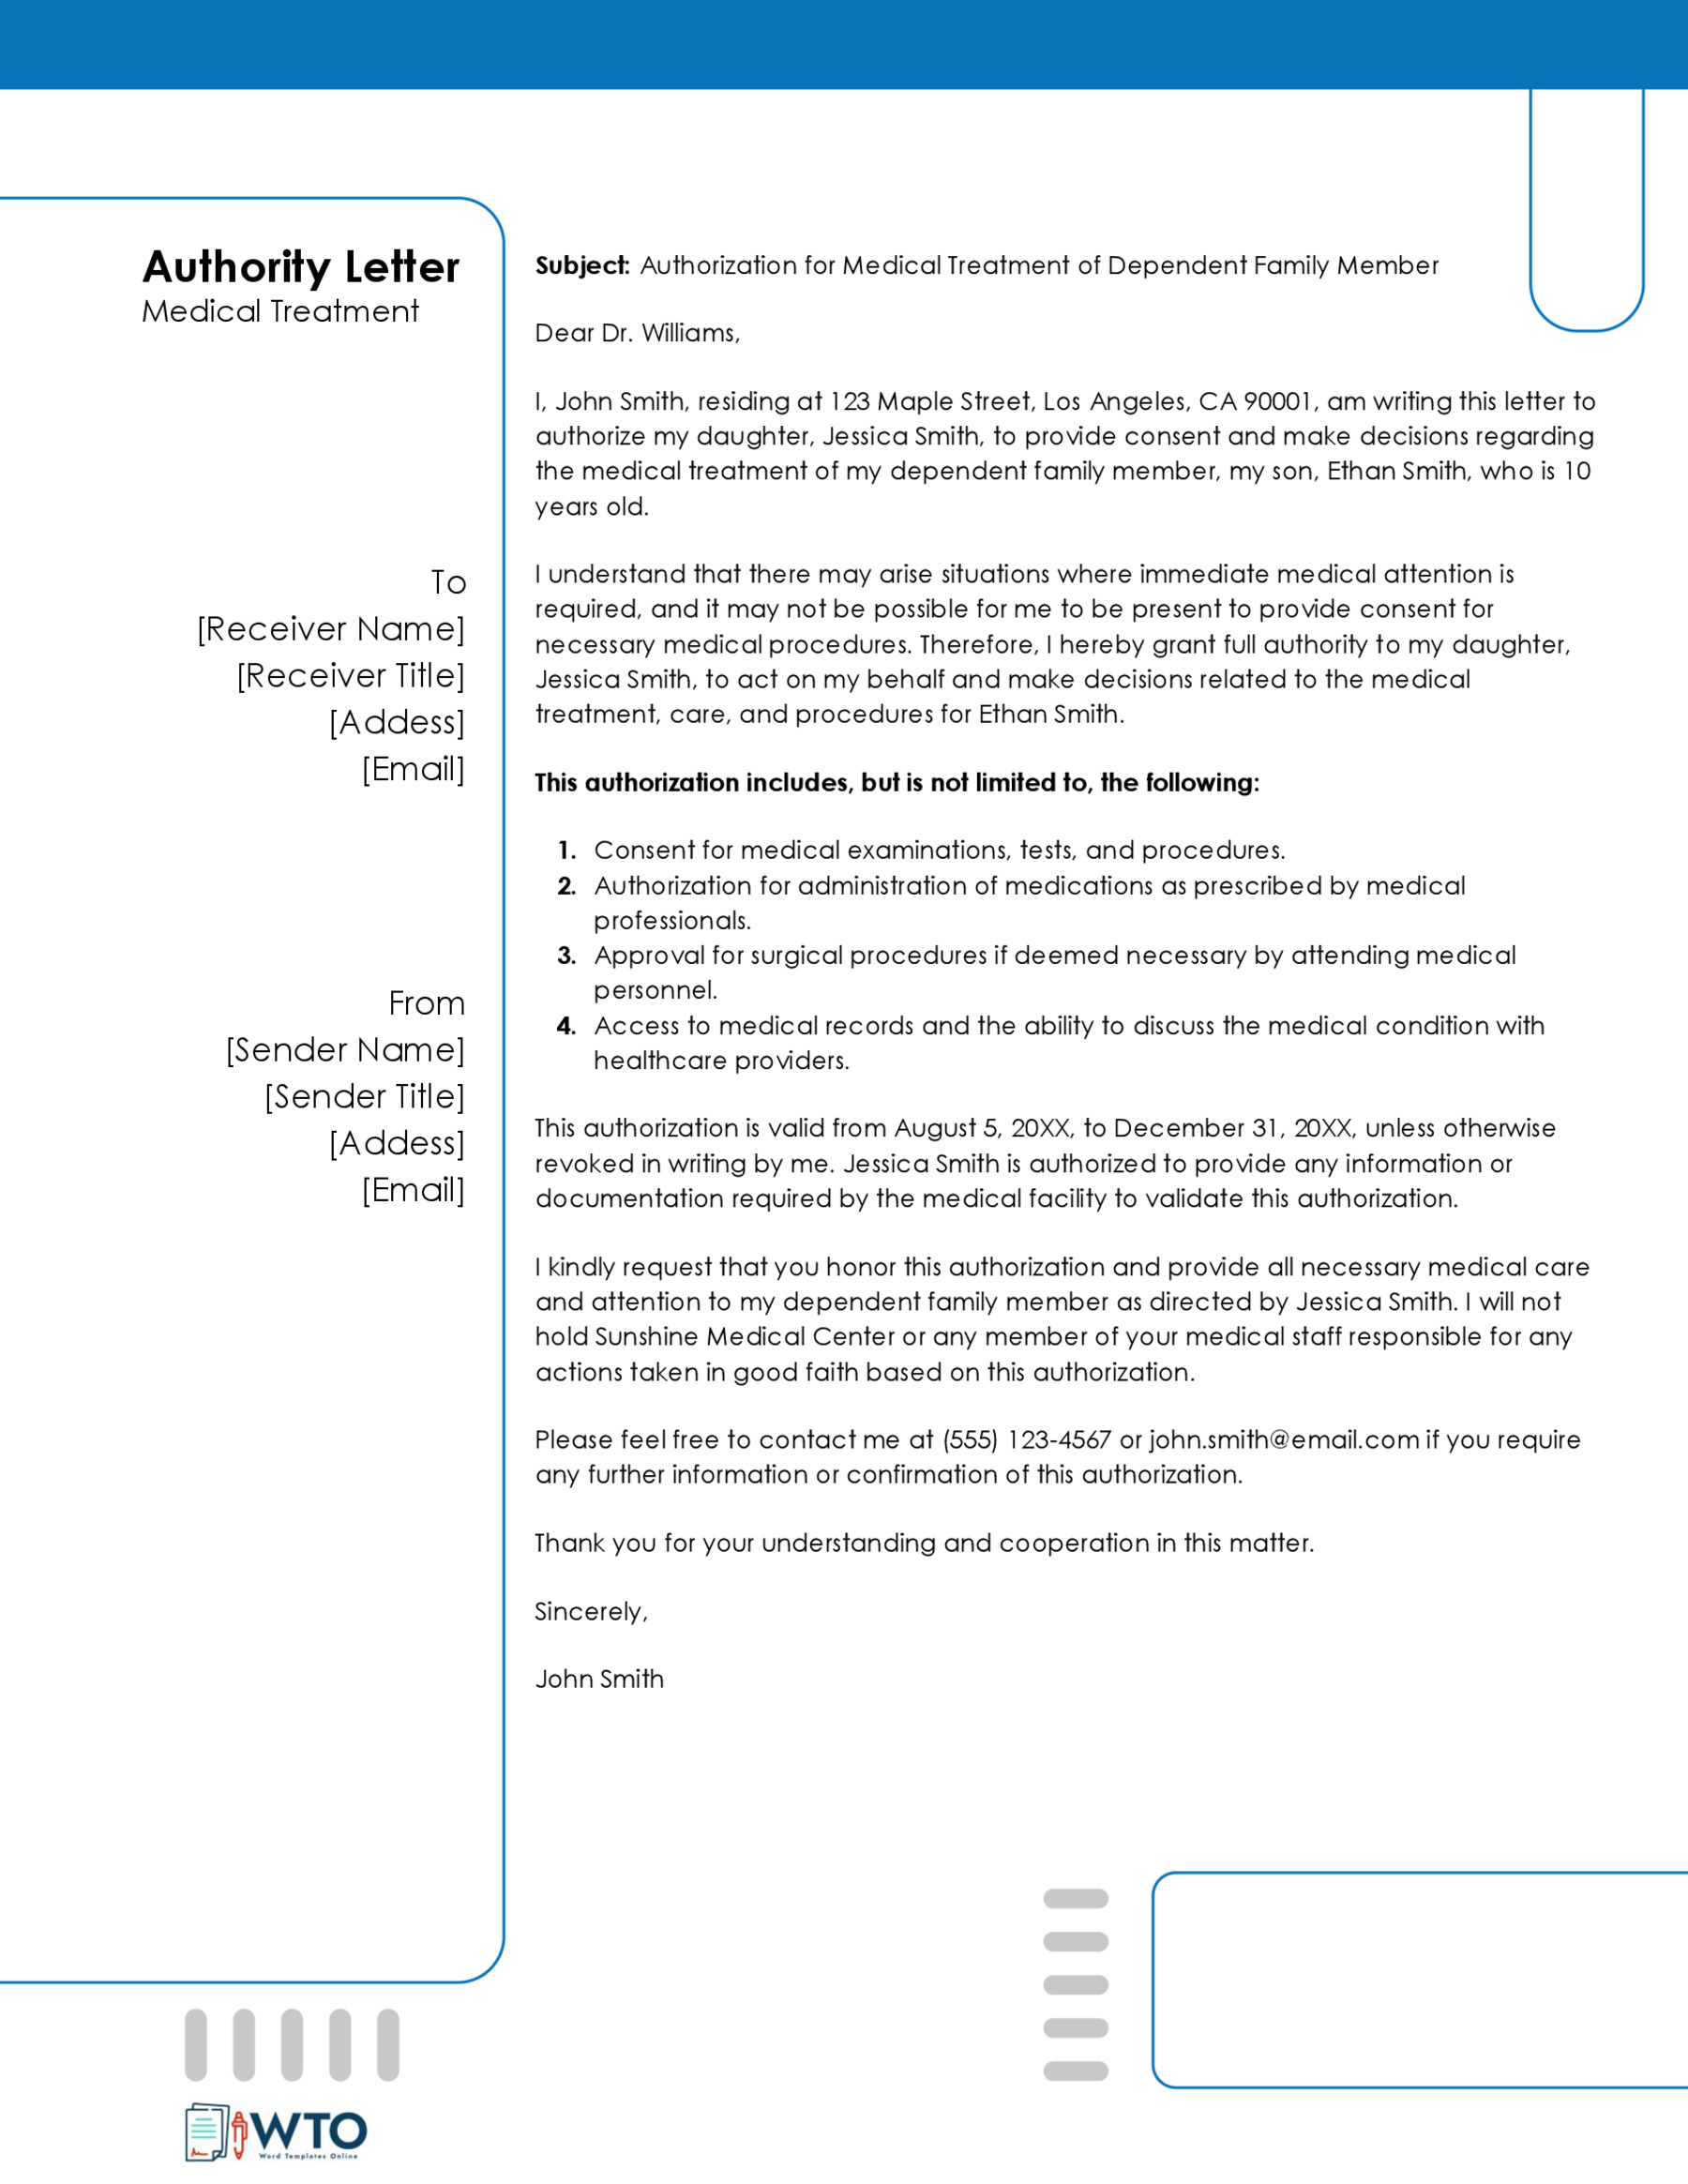 Sample Permission Medical Authorization Letter-Free Download